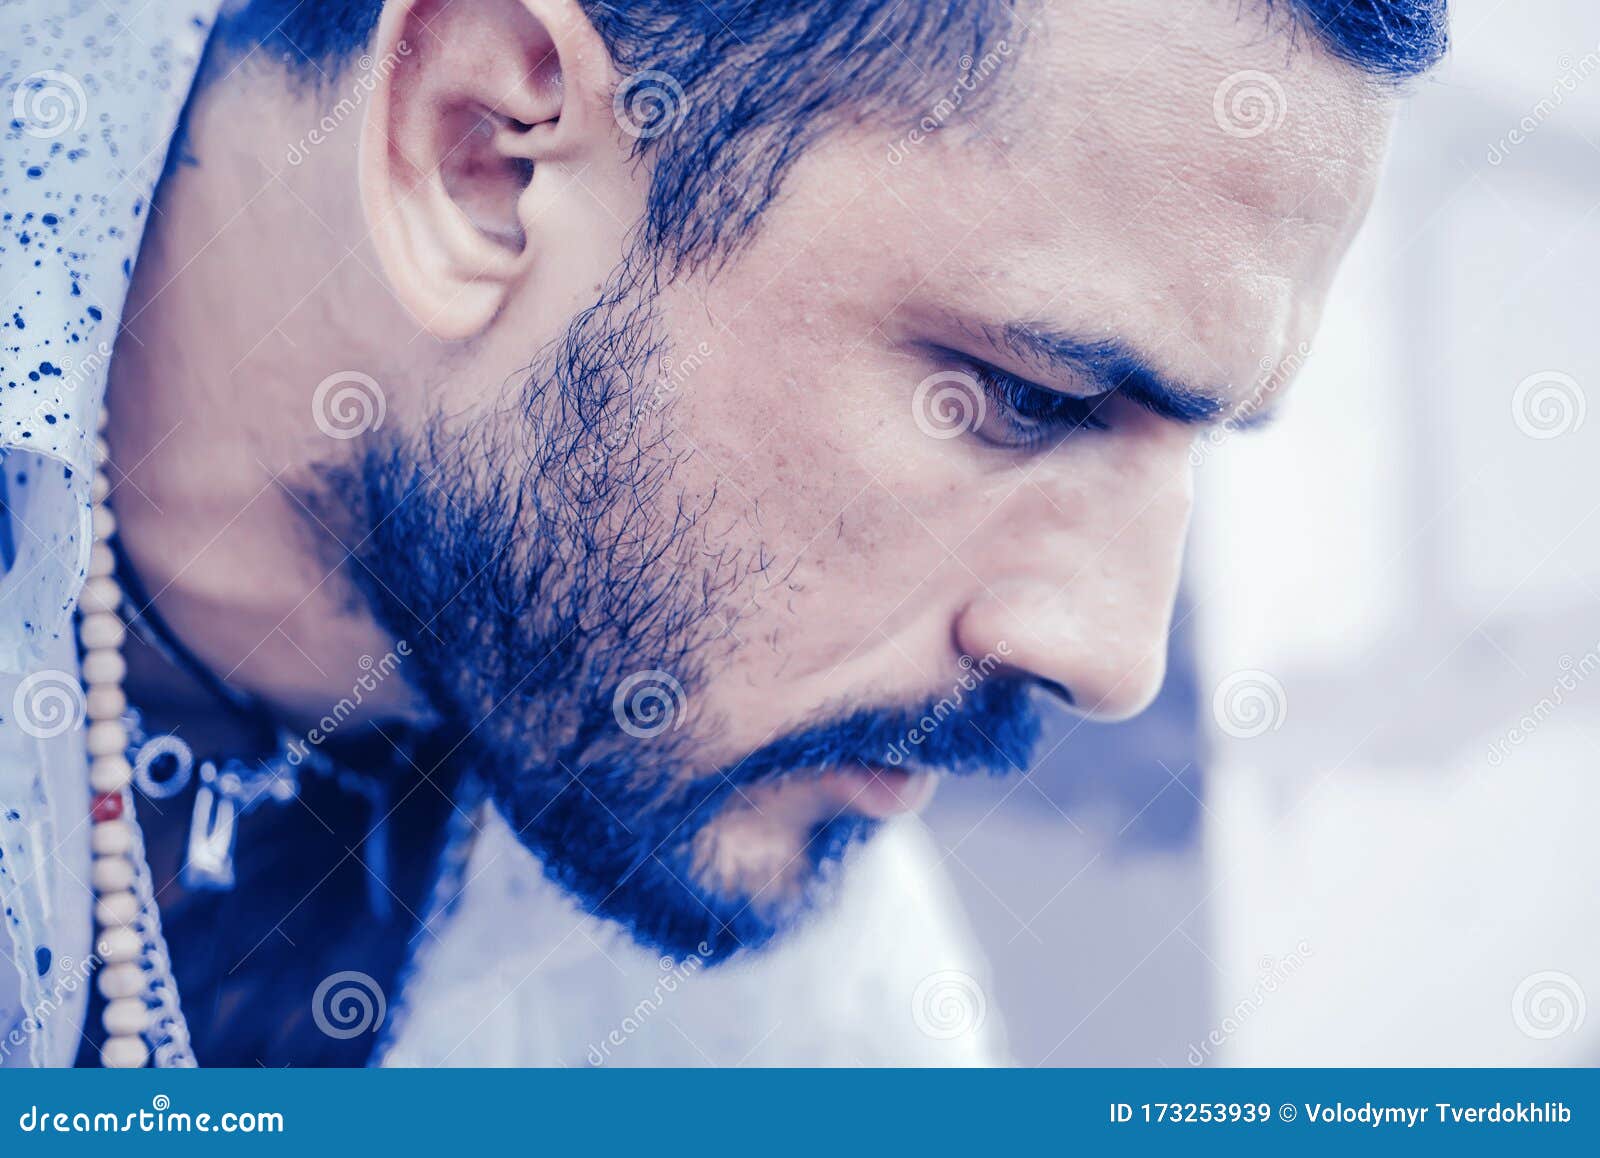 male portrait in sadness. mans fashions. handsome man closeup portrait. stylish latin man. handsome guy sad and strong.